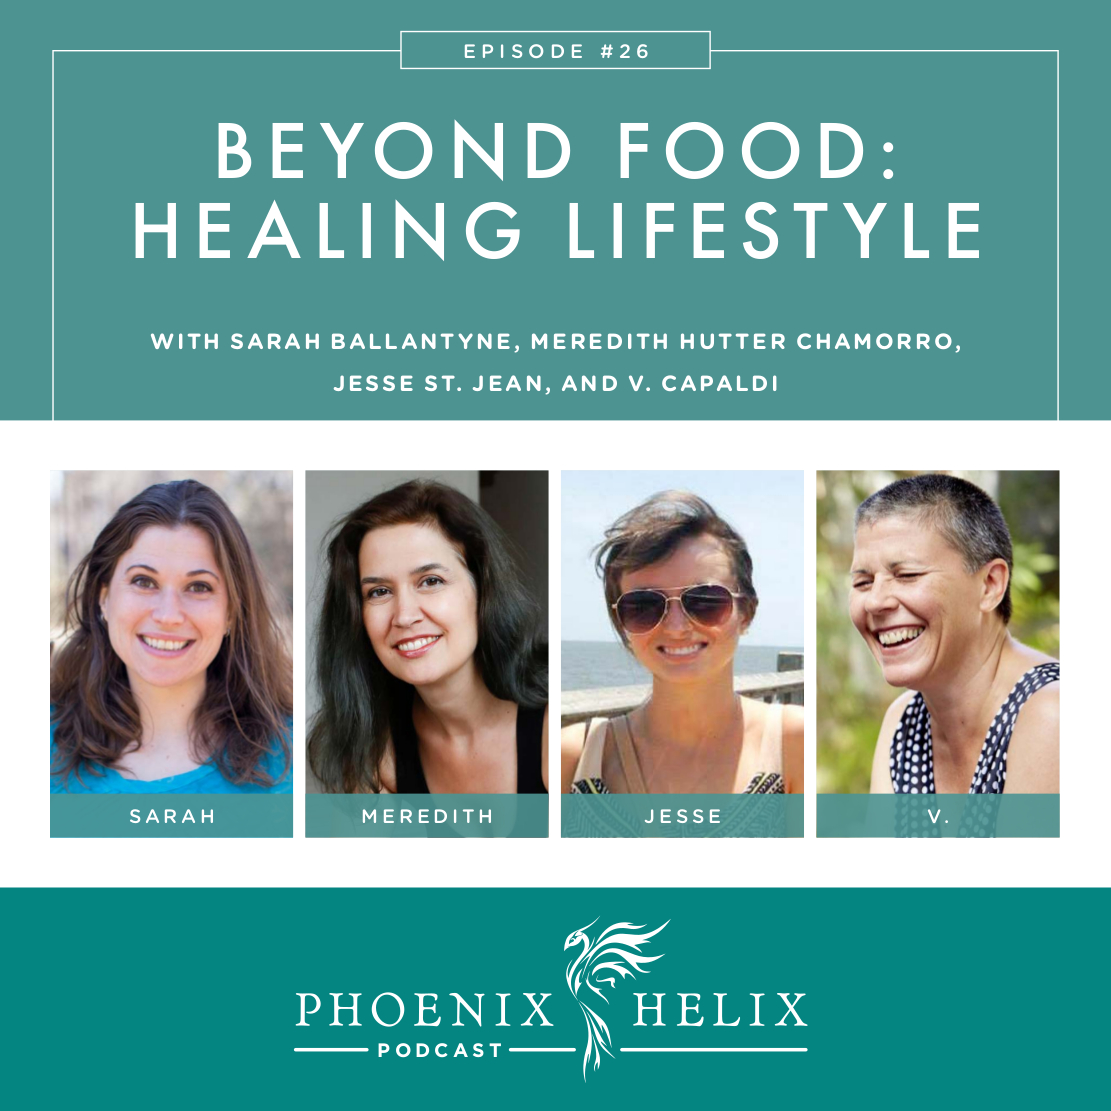 Best of the Phoenix Helix Podcast: Beyond Food - Healing Lifestyle